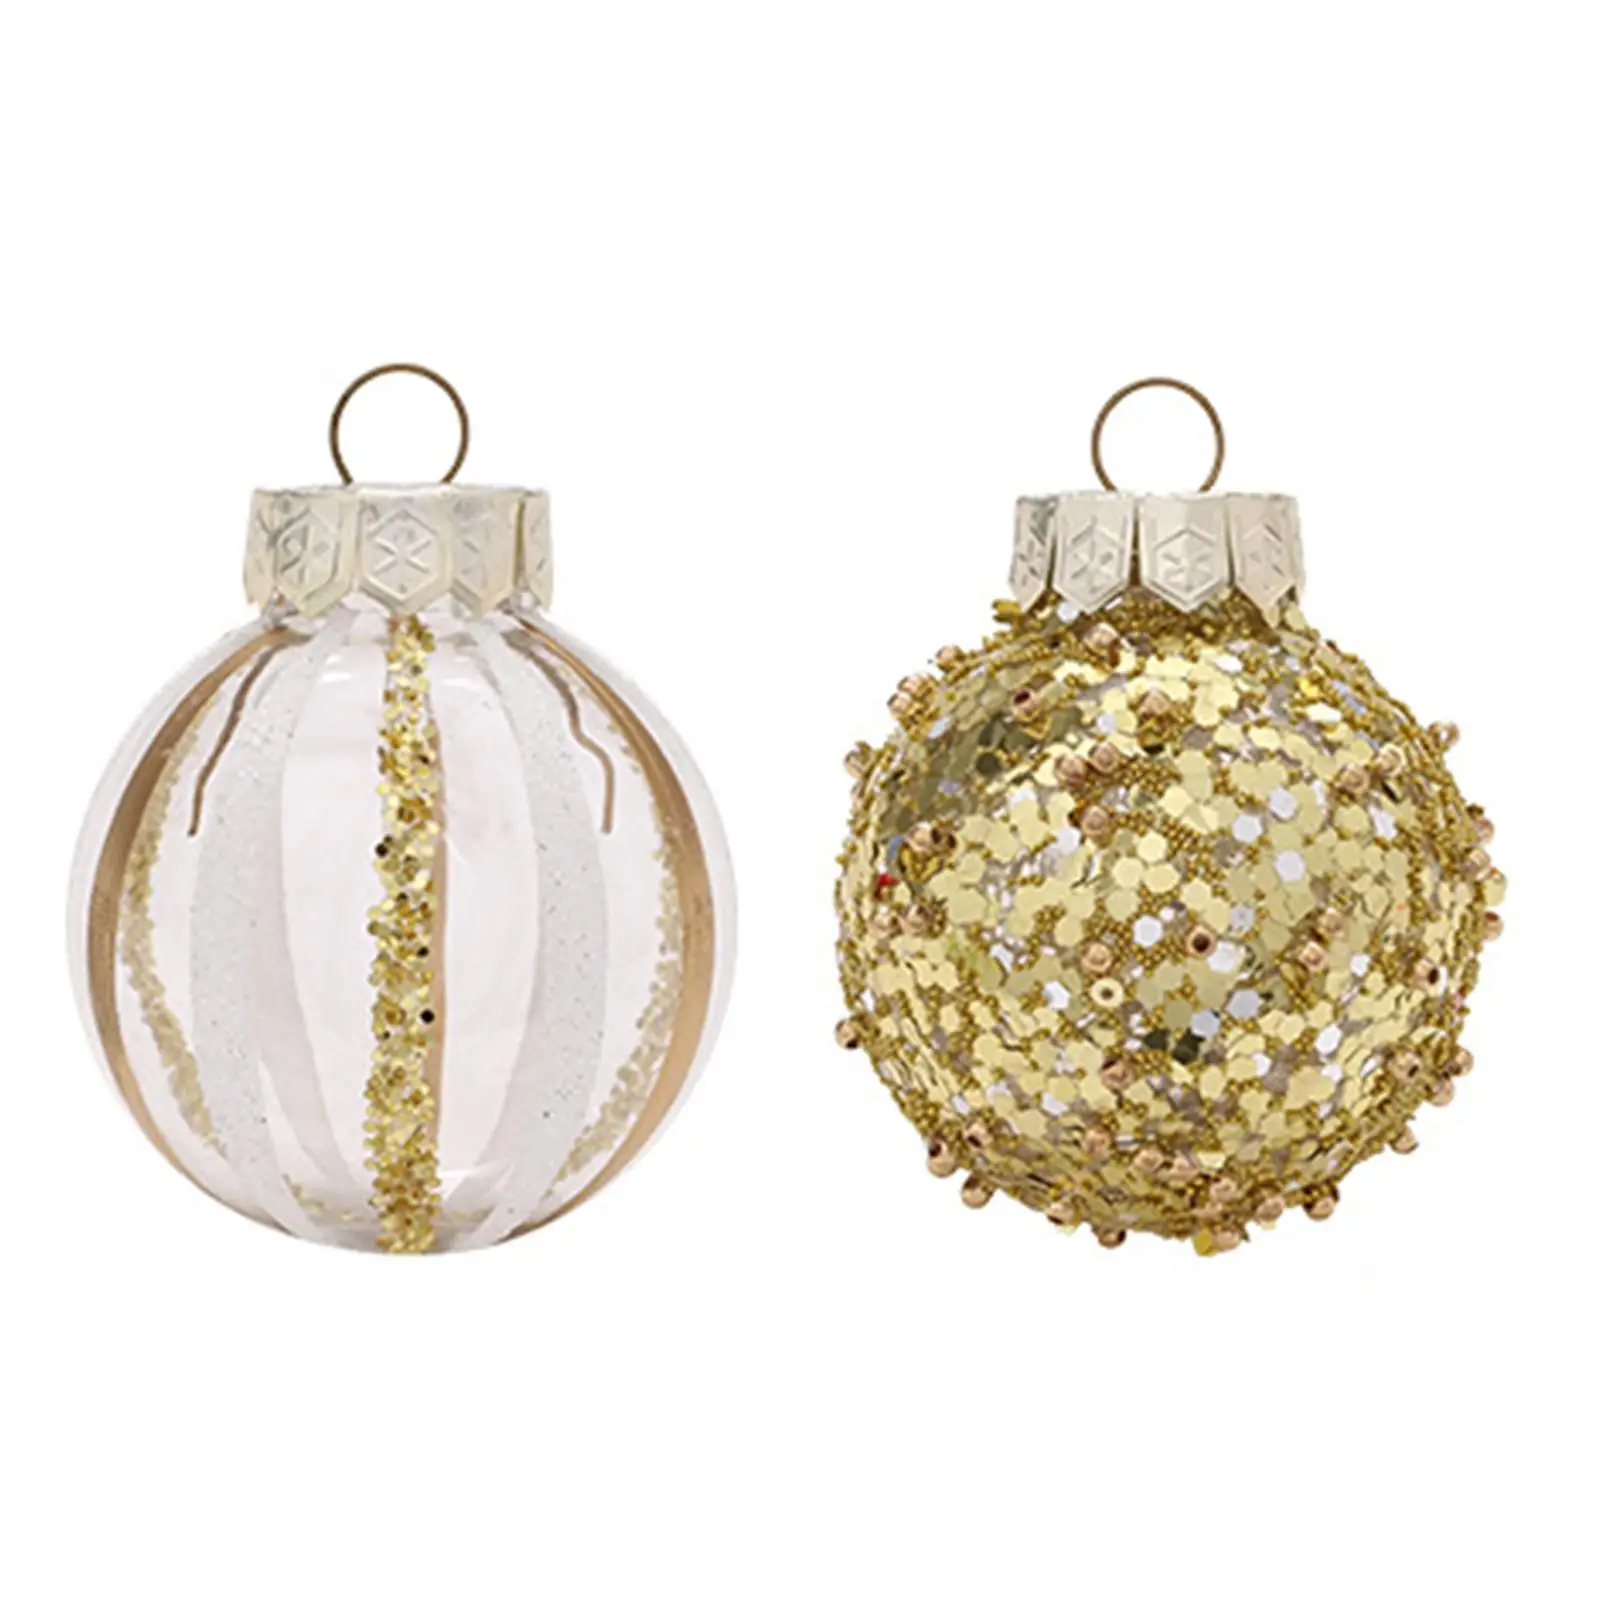 25x Delicate Christmas Ball Ornaments Tree Glitter Hanging Decorations for Party